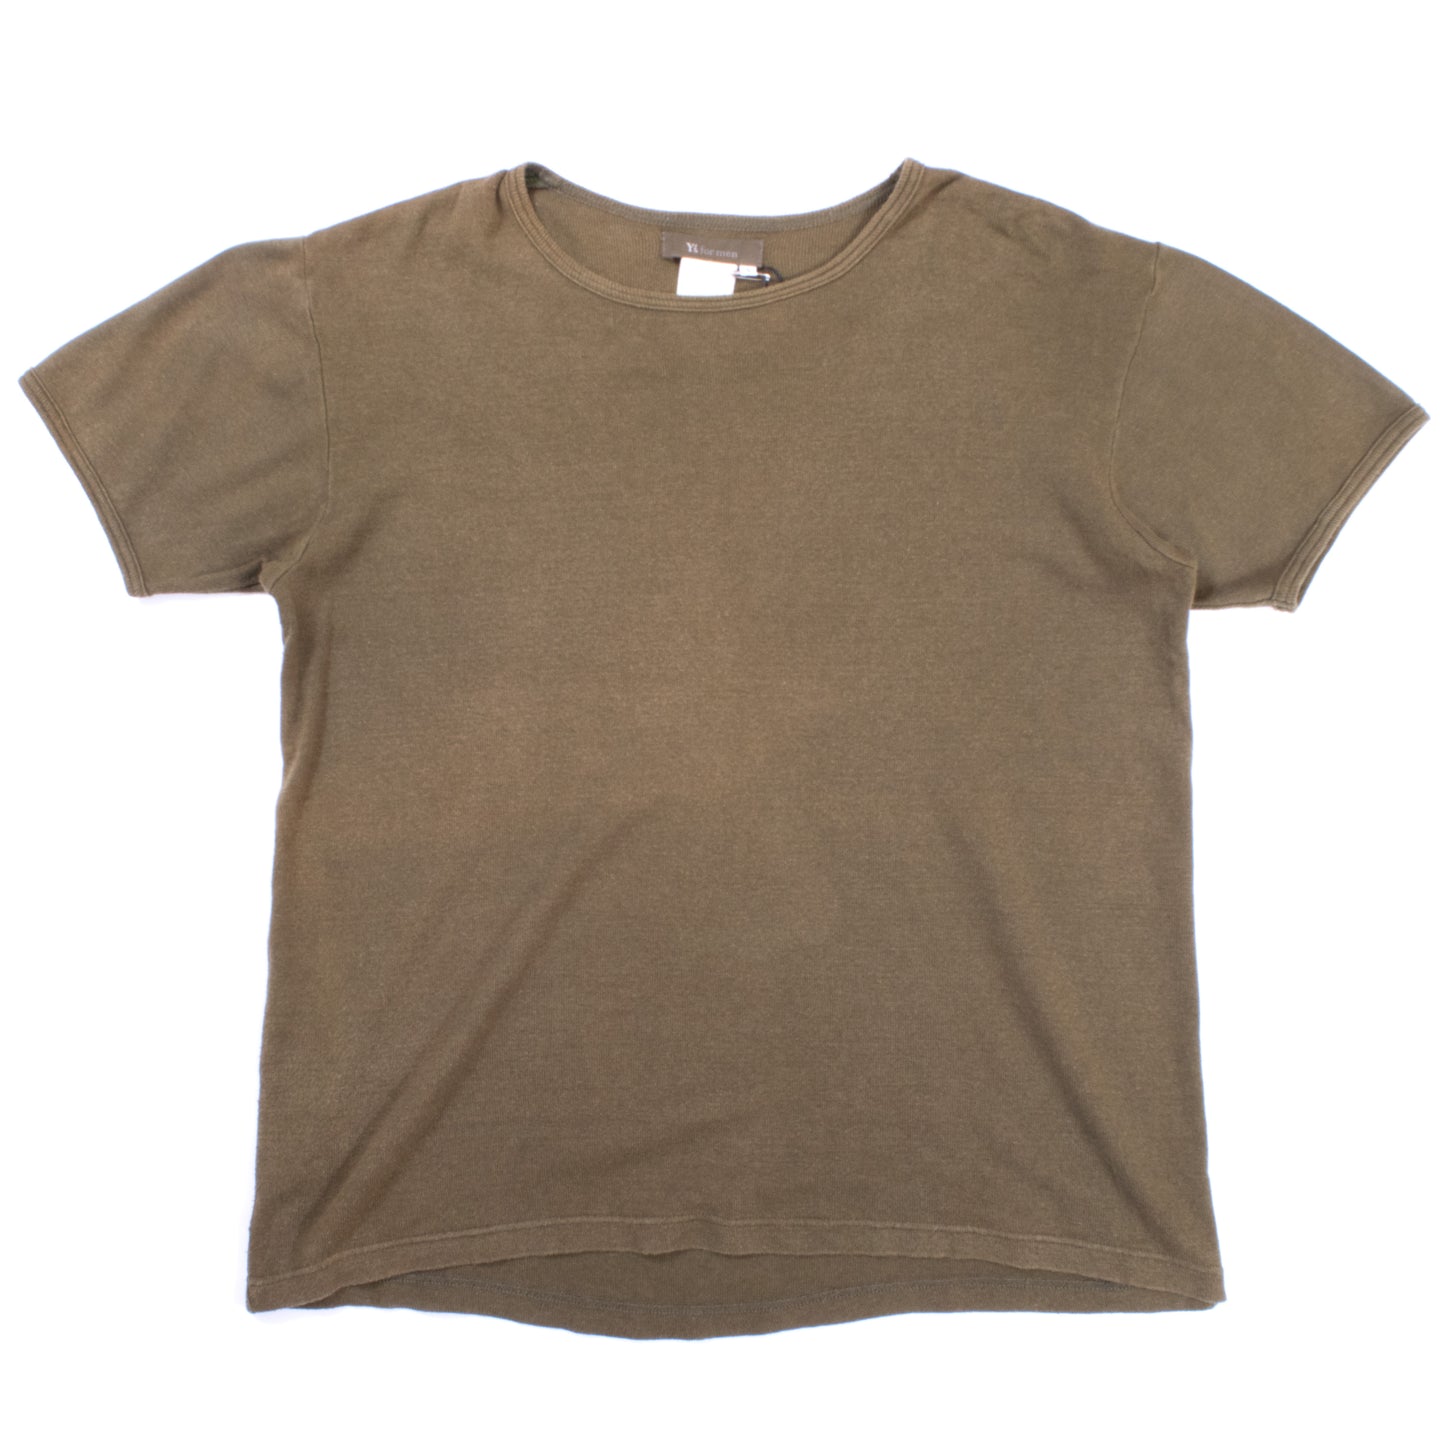 Y's For Men Brown T-Shirt